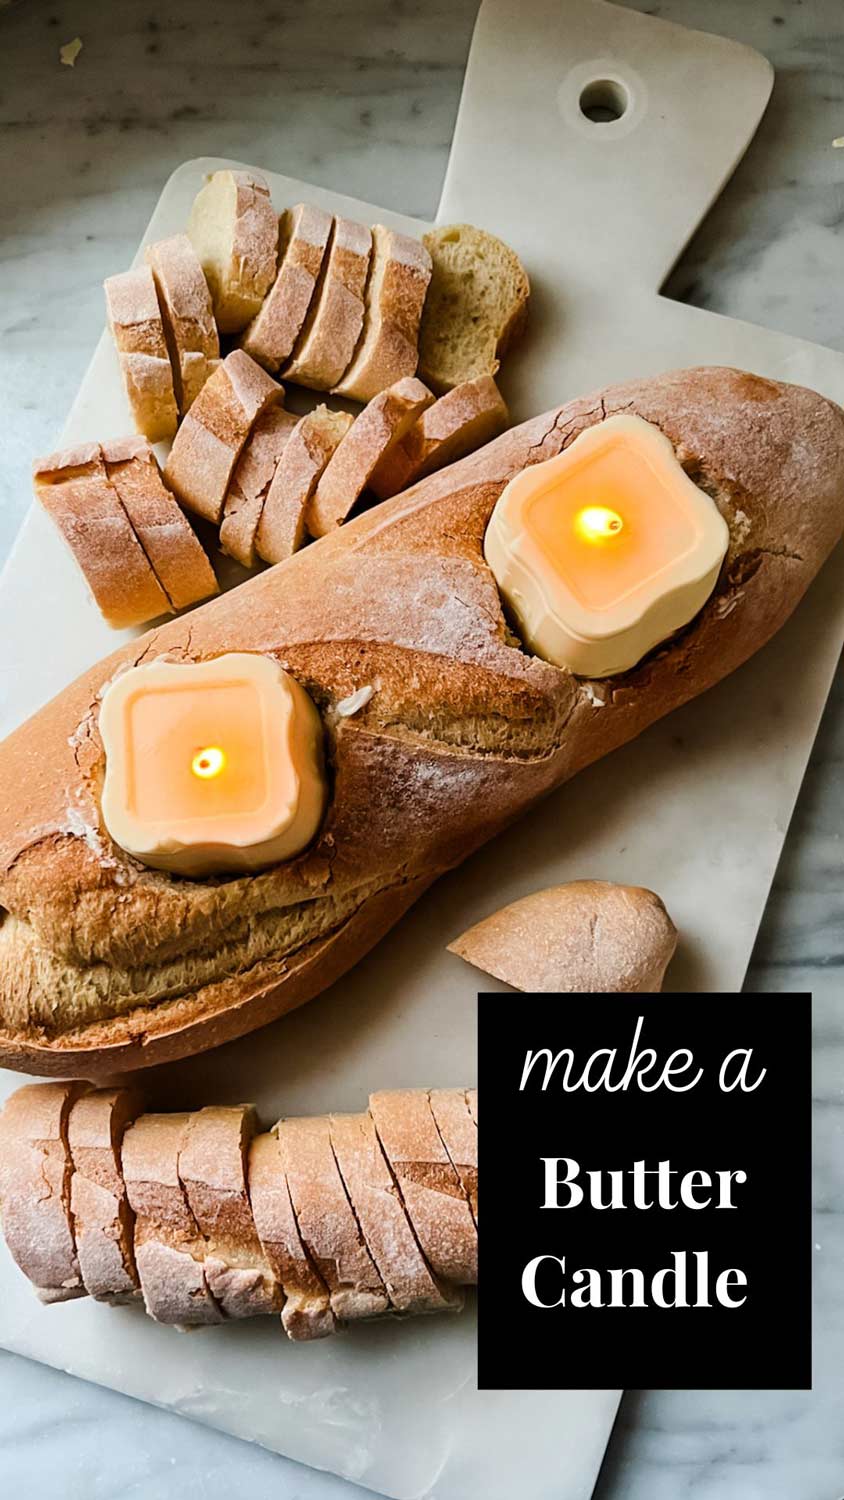 Make a butter candle to up your food game this weekend